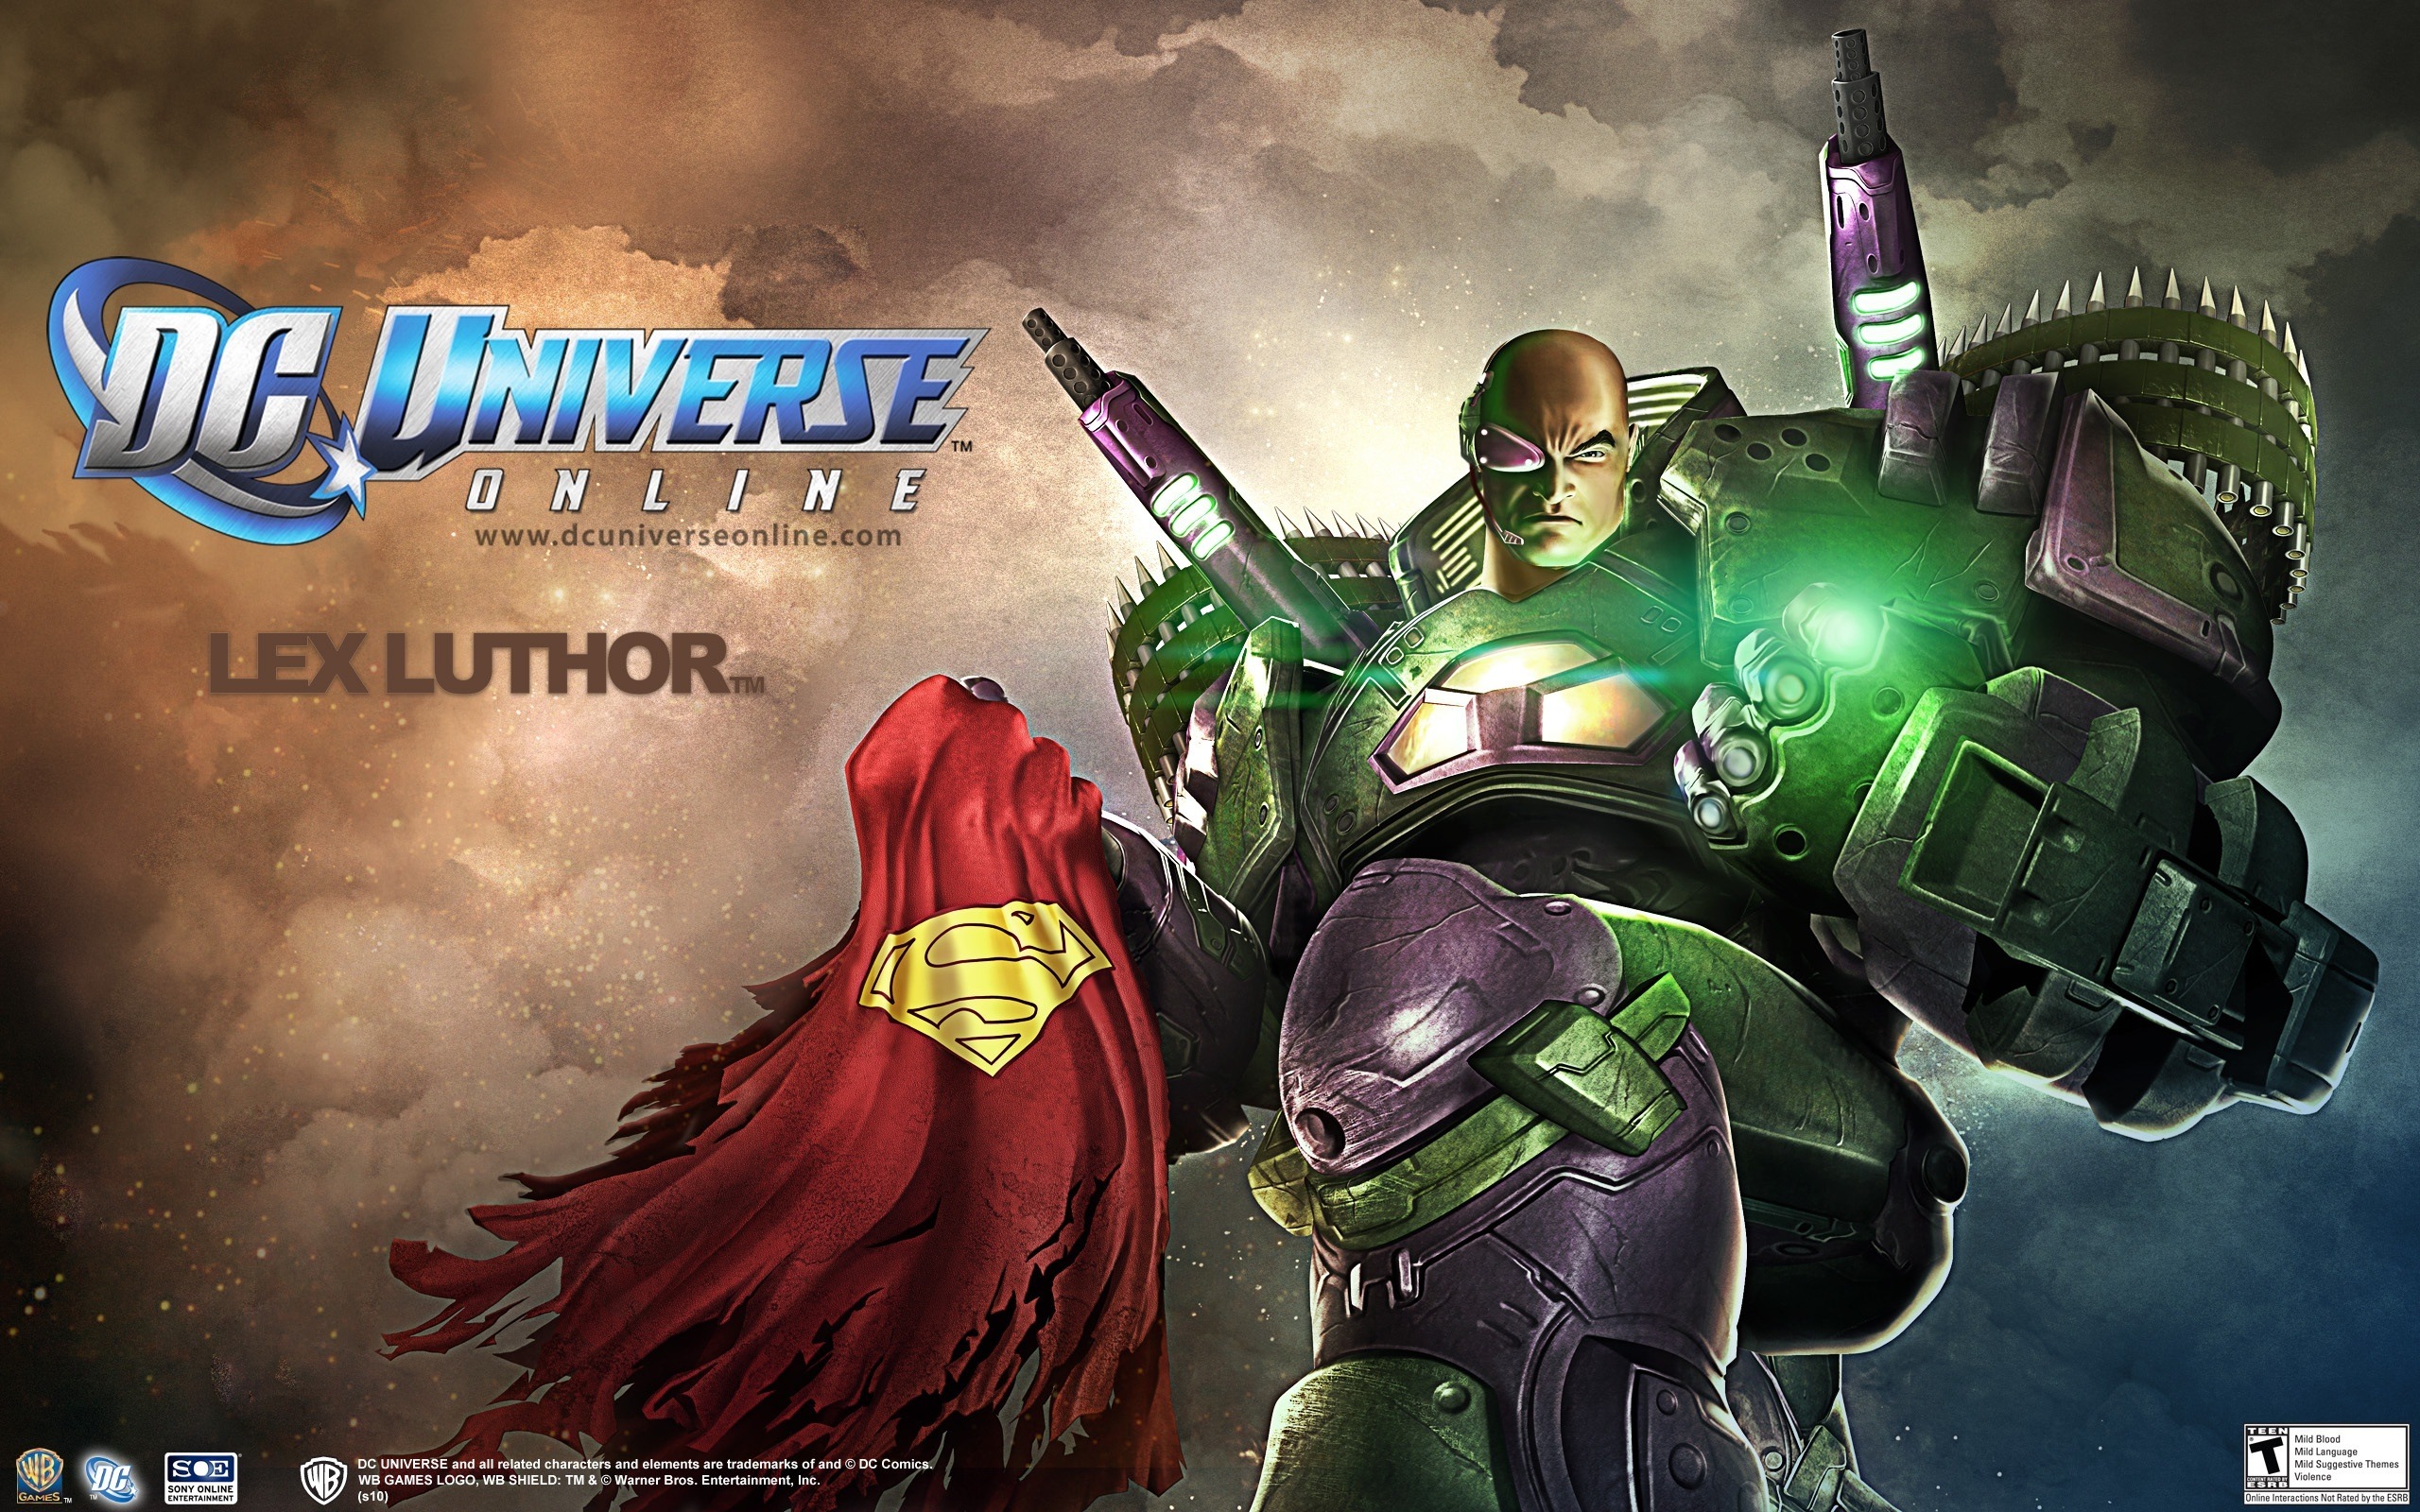 DC Universe Online HD game wallpapers #19 - 2560x1600